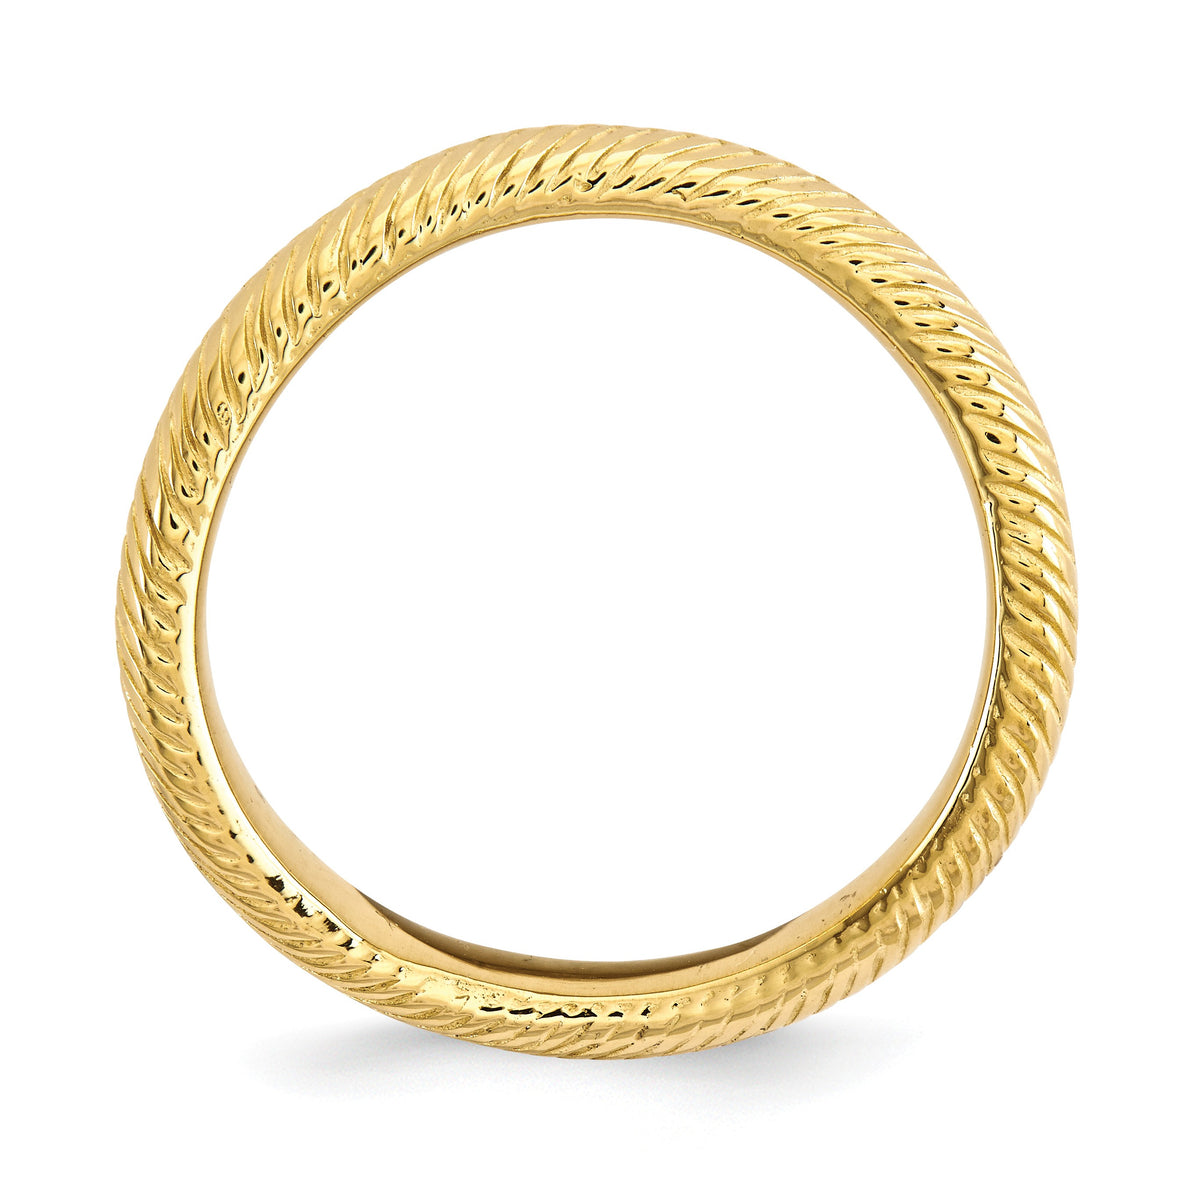 Alternate view of the 3.25mm Stackable 14K Yellow Gold Plated Silver Curved Herringbone Band by The Black Bow Jewelry Co.